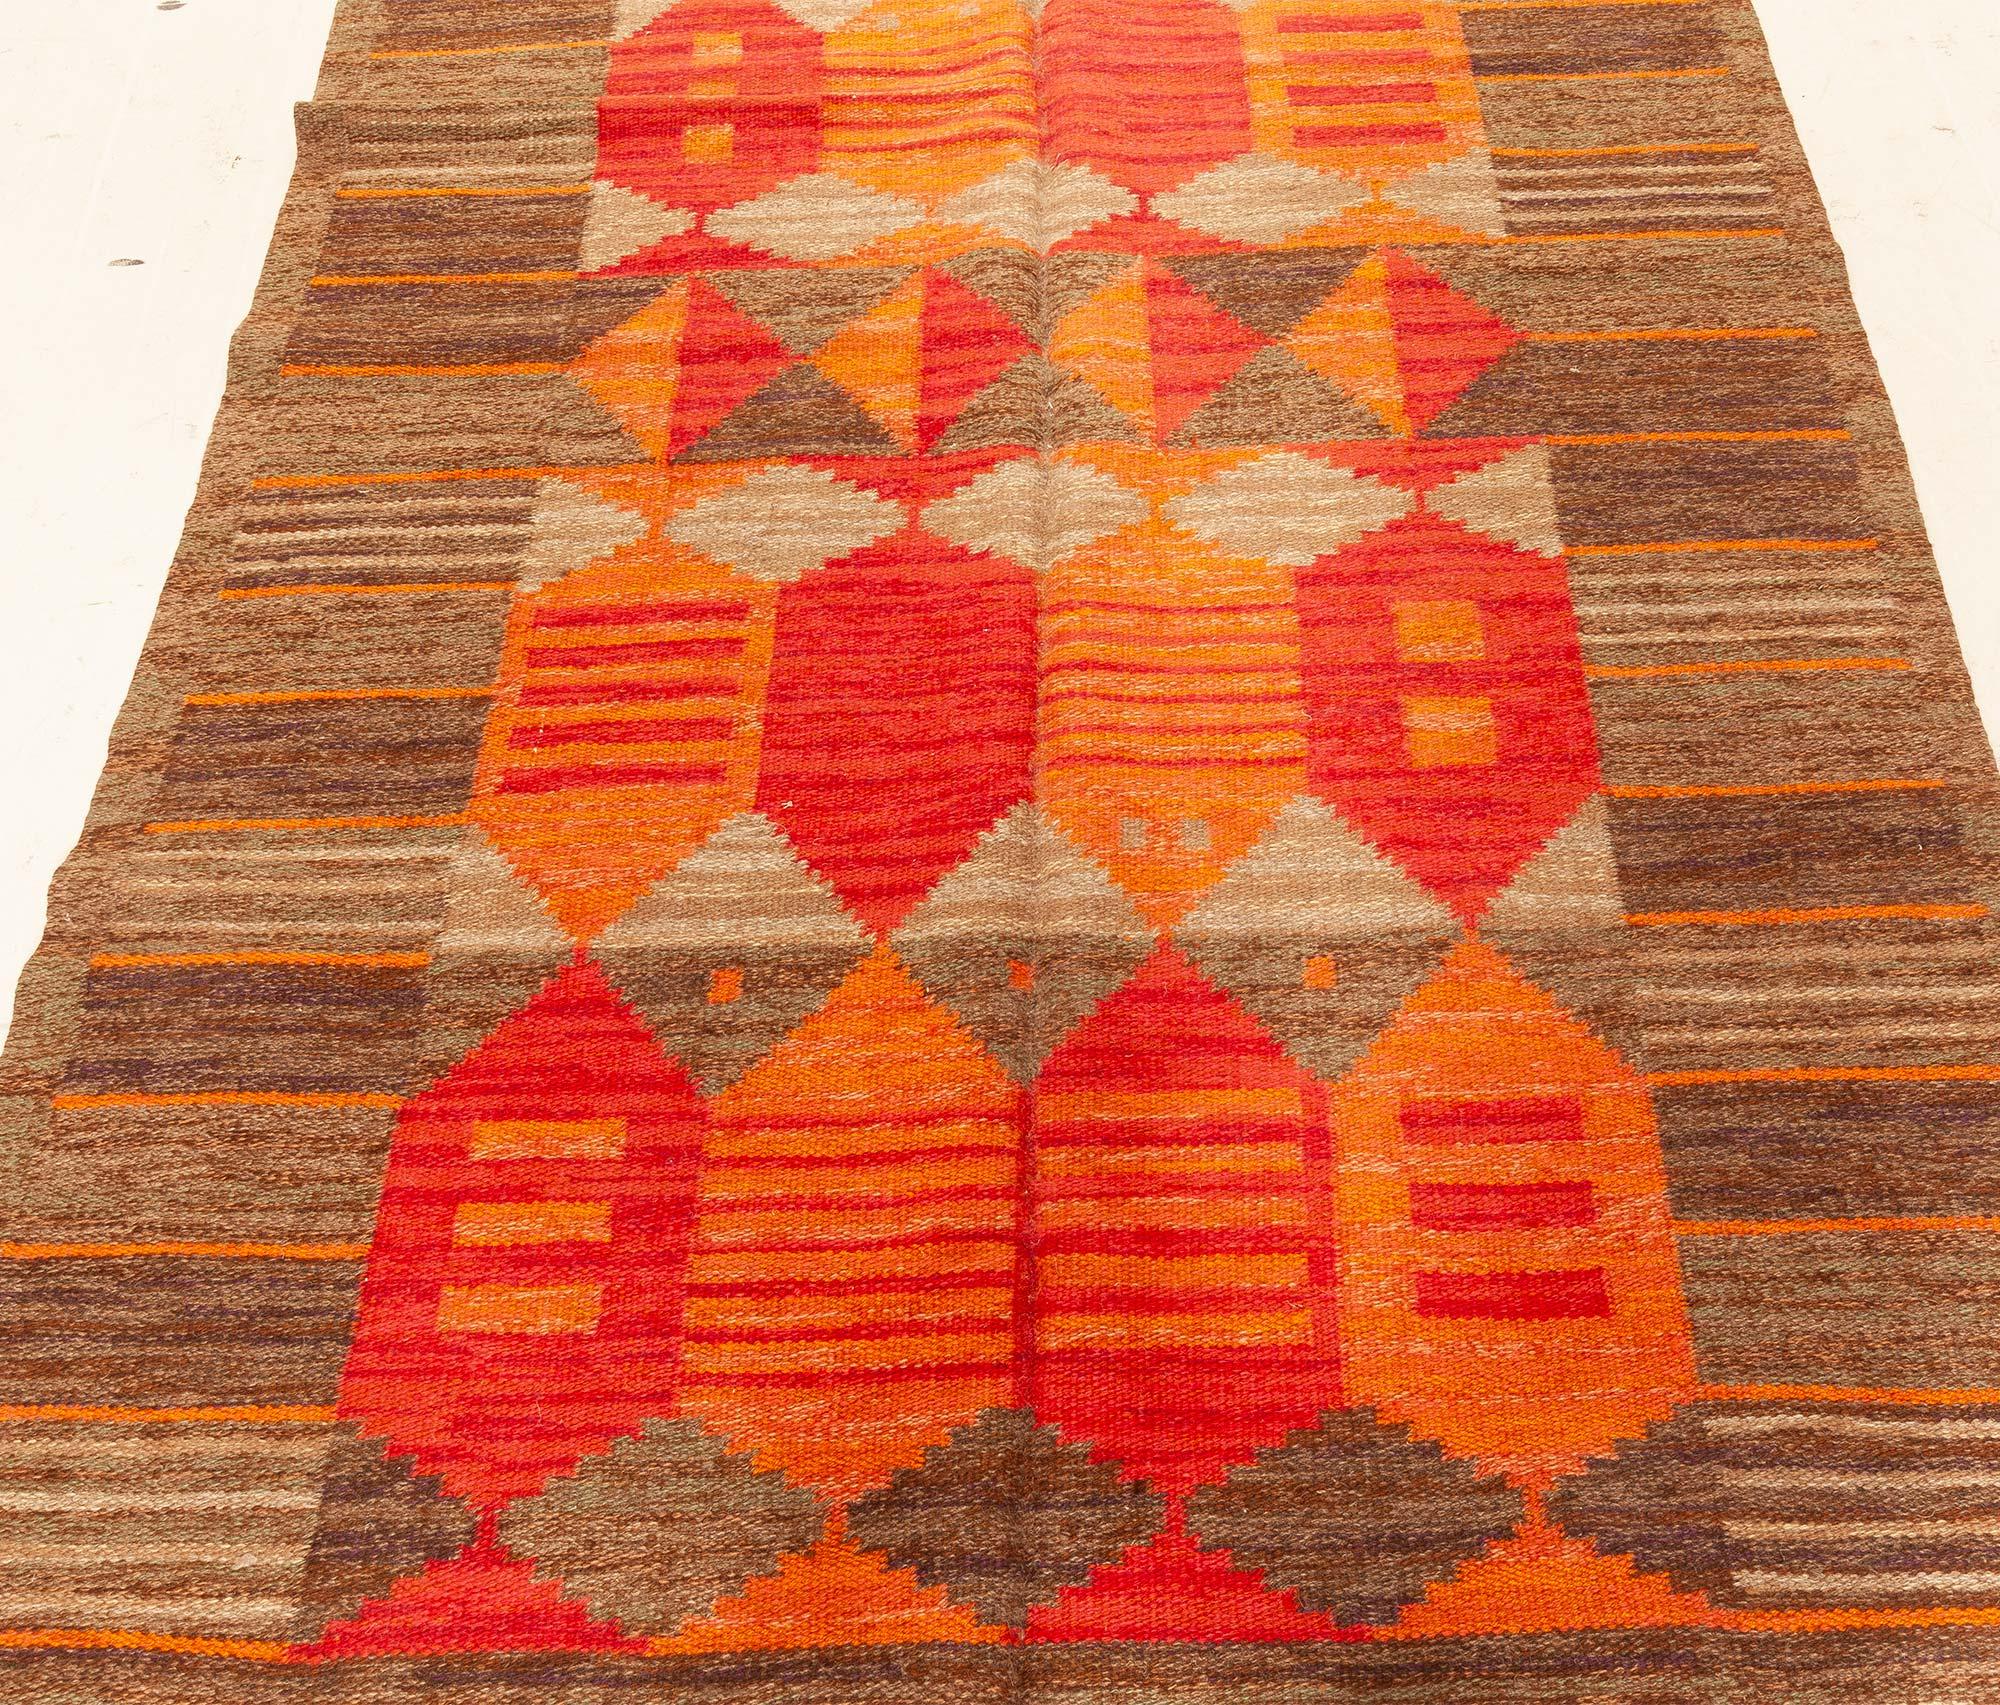 Hand-Knotted Midcentury Swedish Flat-Woven Rug by Karin Jönsson For Sale